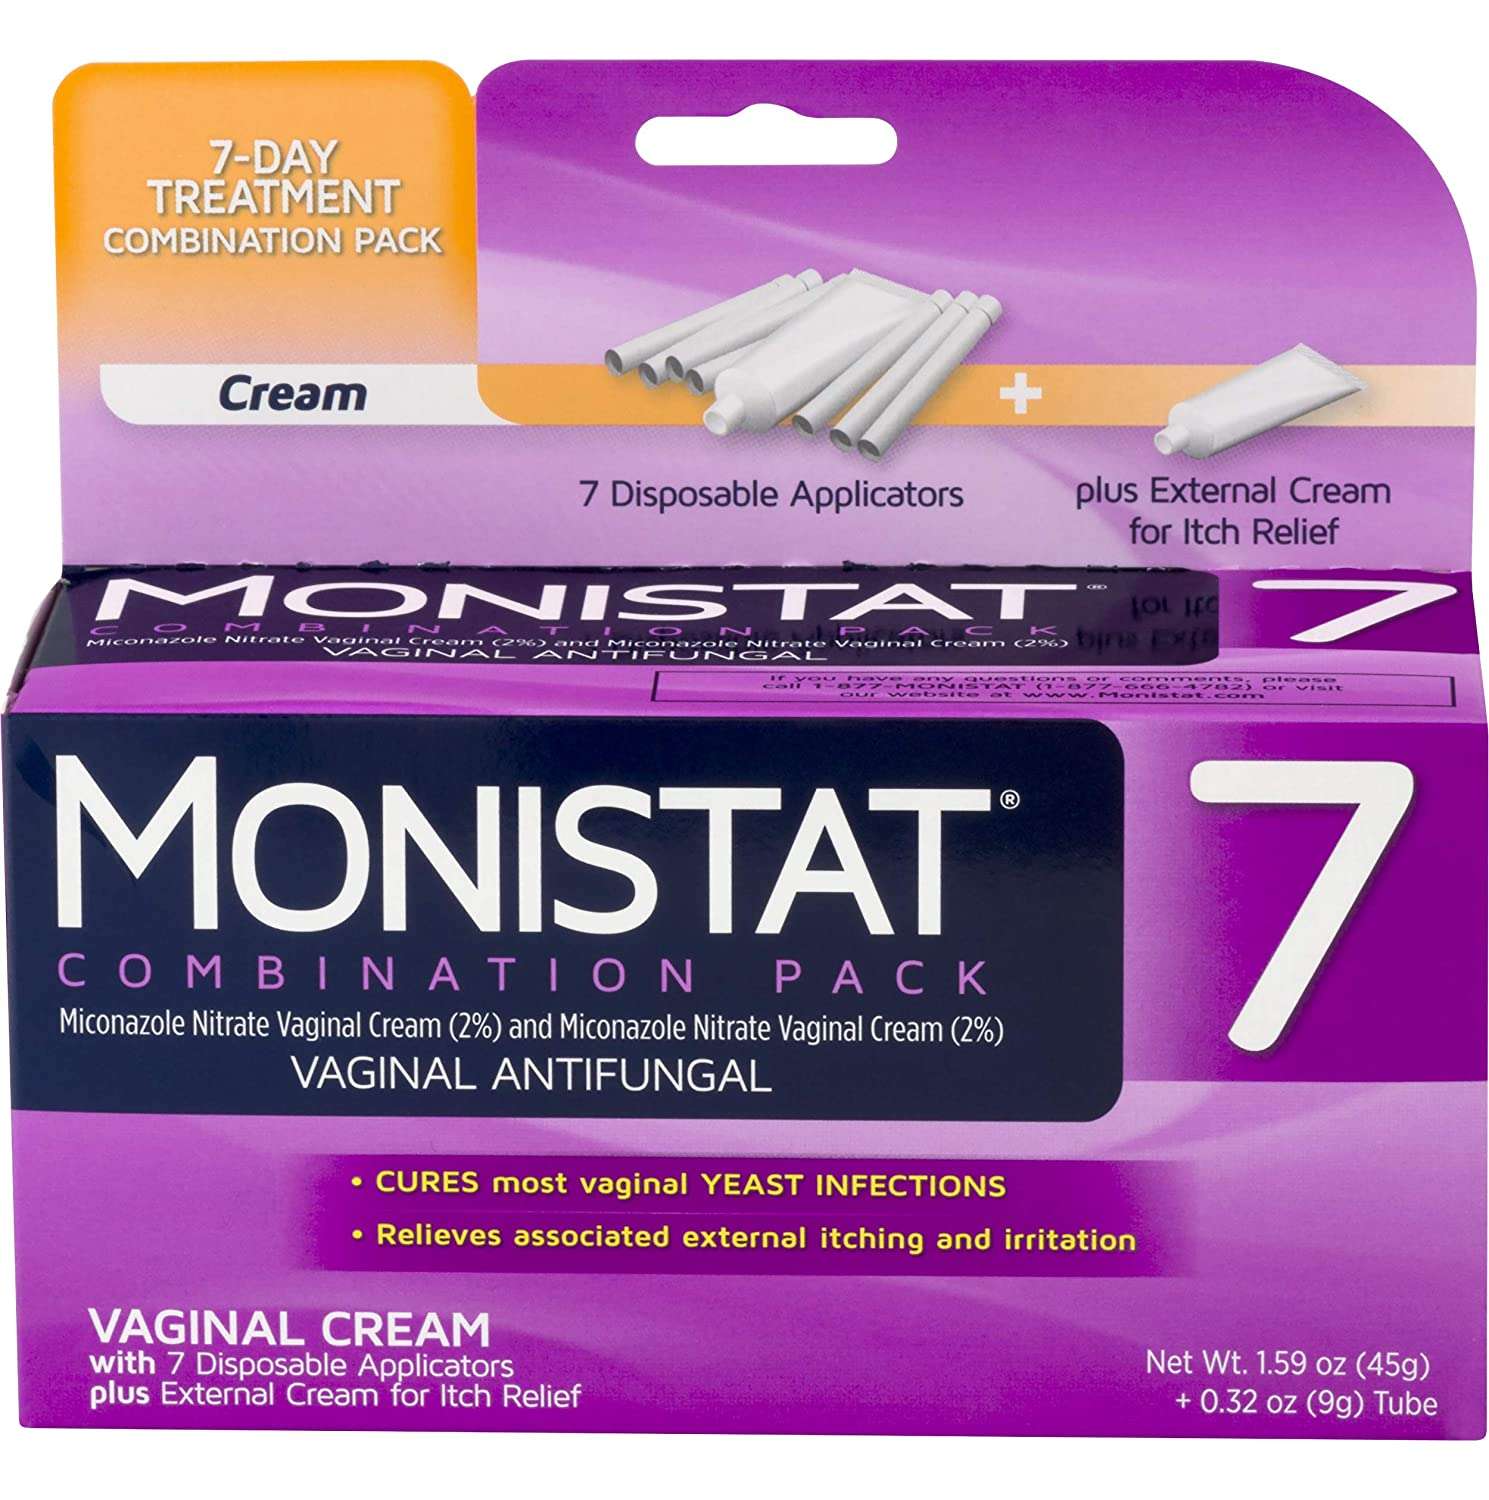 Which Monistat Is Better For Yeast Infections